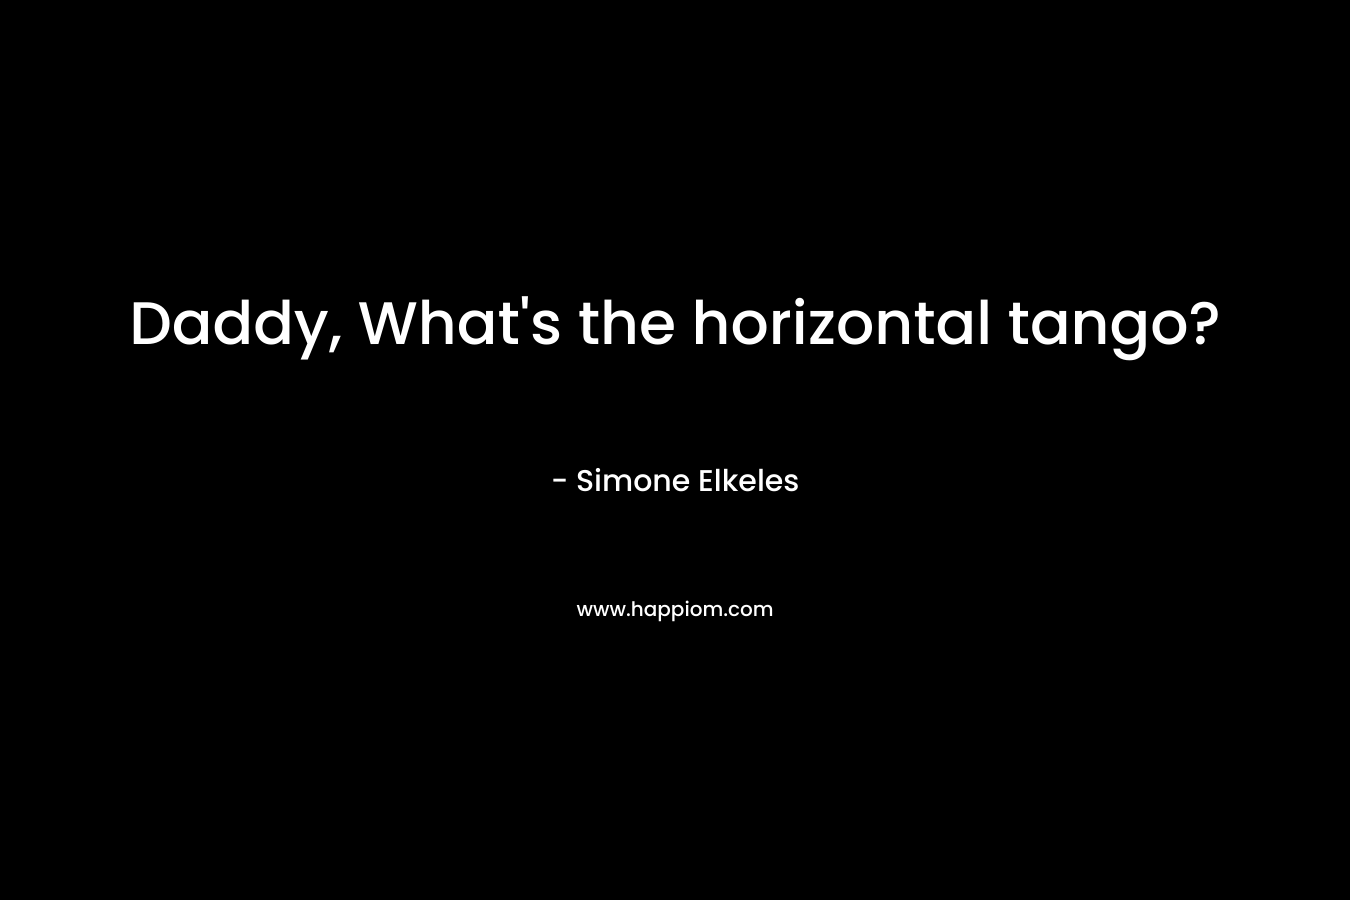 Daddy, What's the horizontal tango?